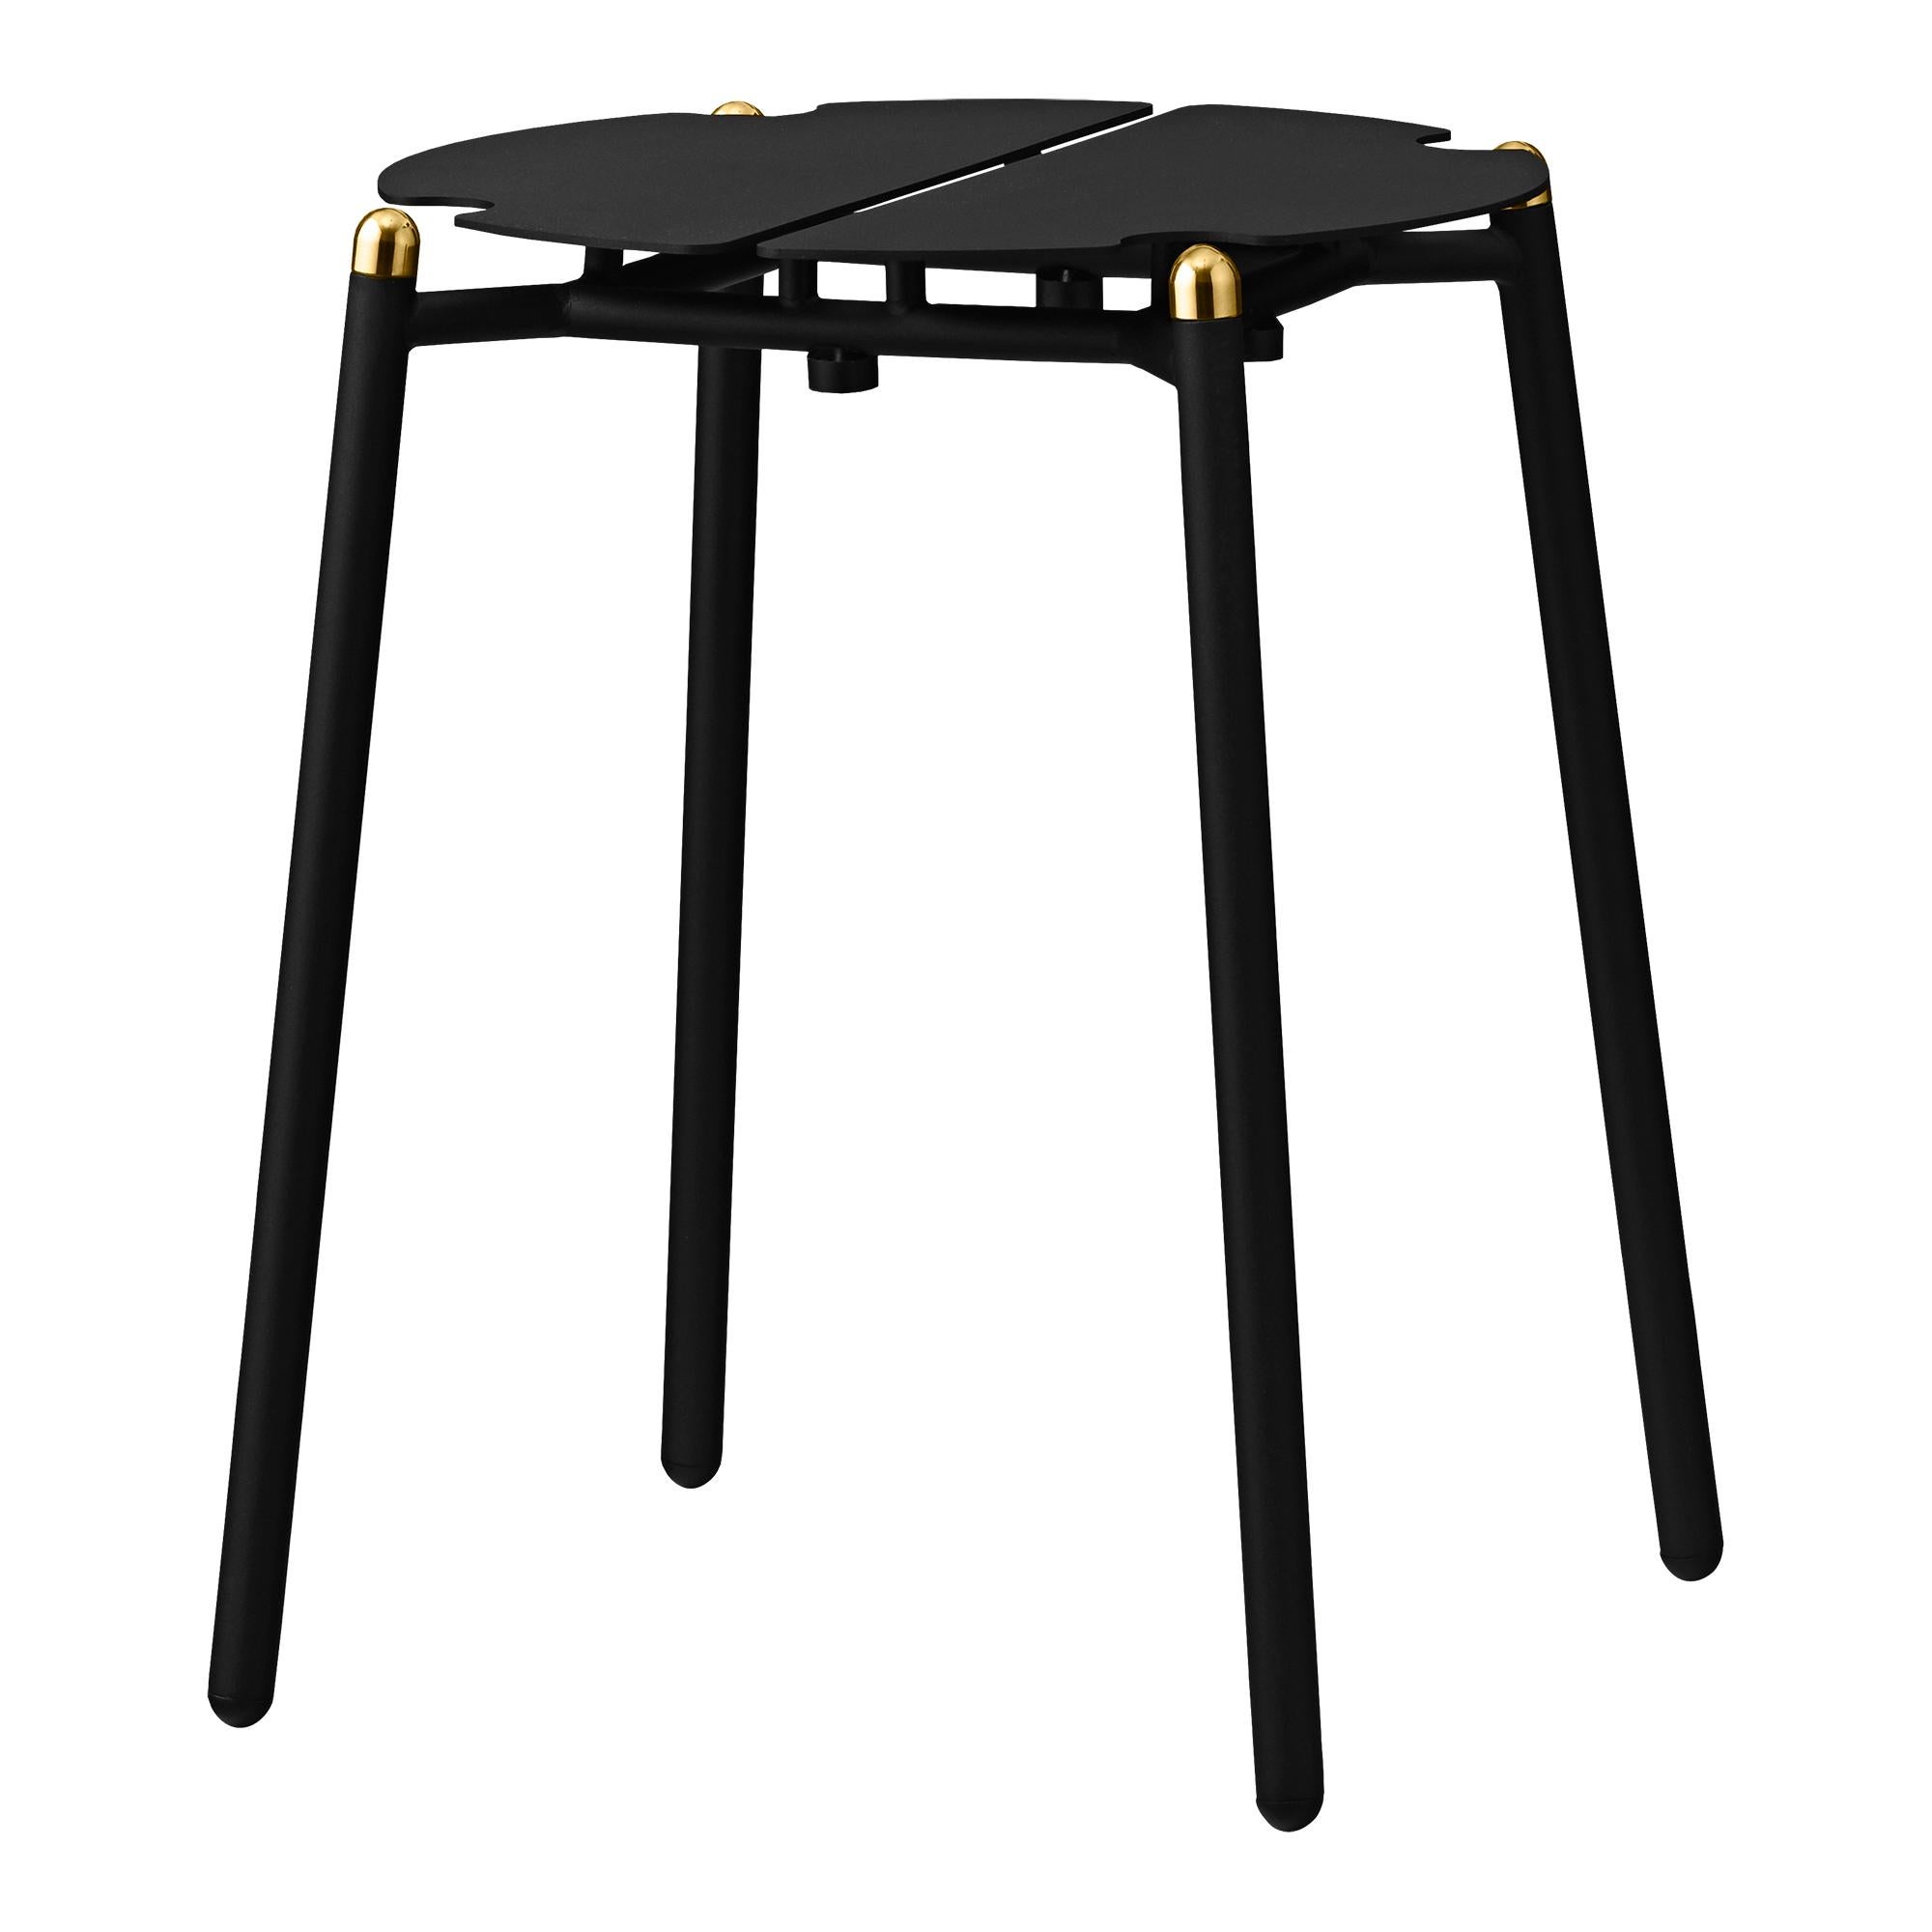 Black and Gold Minimalist stool 
Dimensions: Diameter 35 x H 45 cm 
Materials: Steel w. Matte Powder Coating, Aluminum w. Matte Powder Coating & Stainless Steel w. Gold Titanium Plating.
Available in colors: Taupe, Bordeaux, Forest, Ginger Bread,